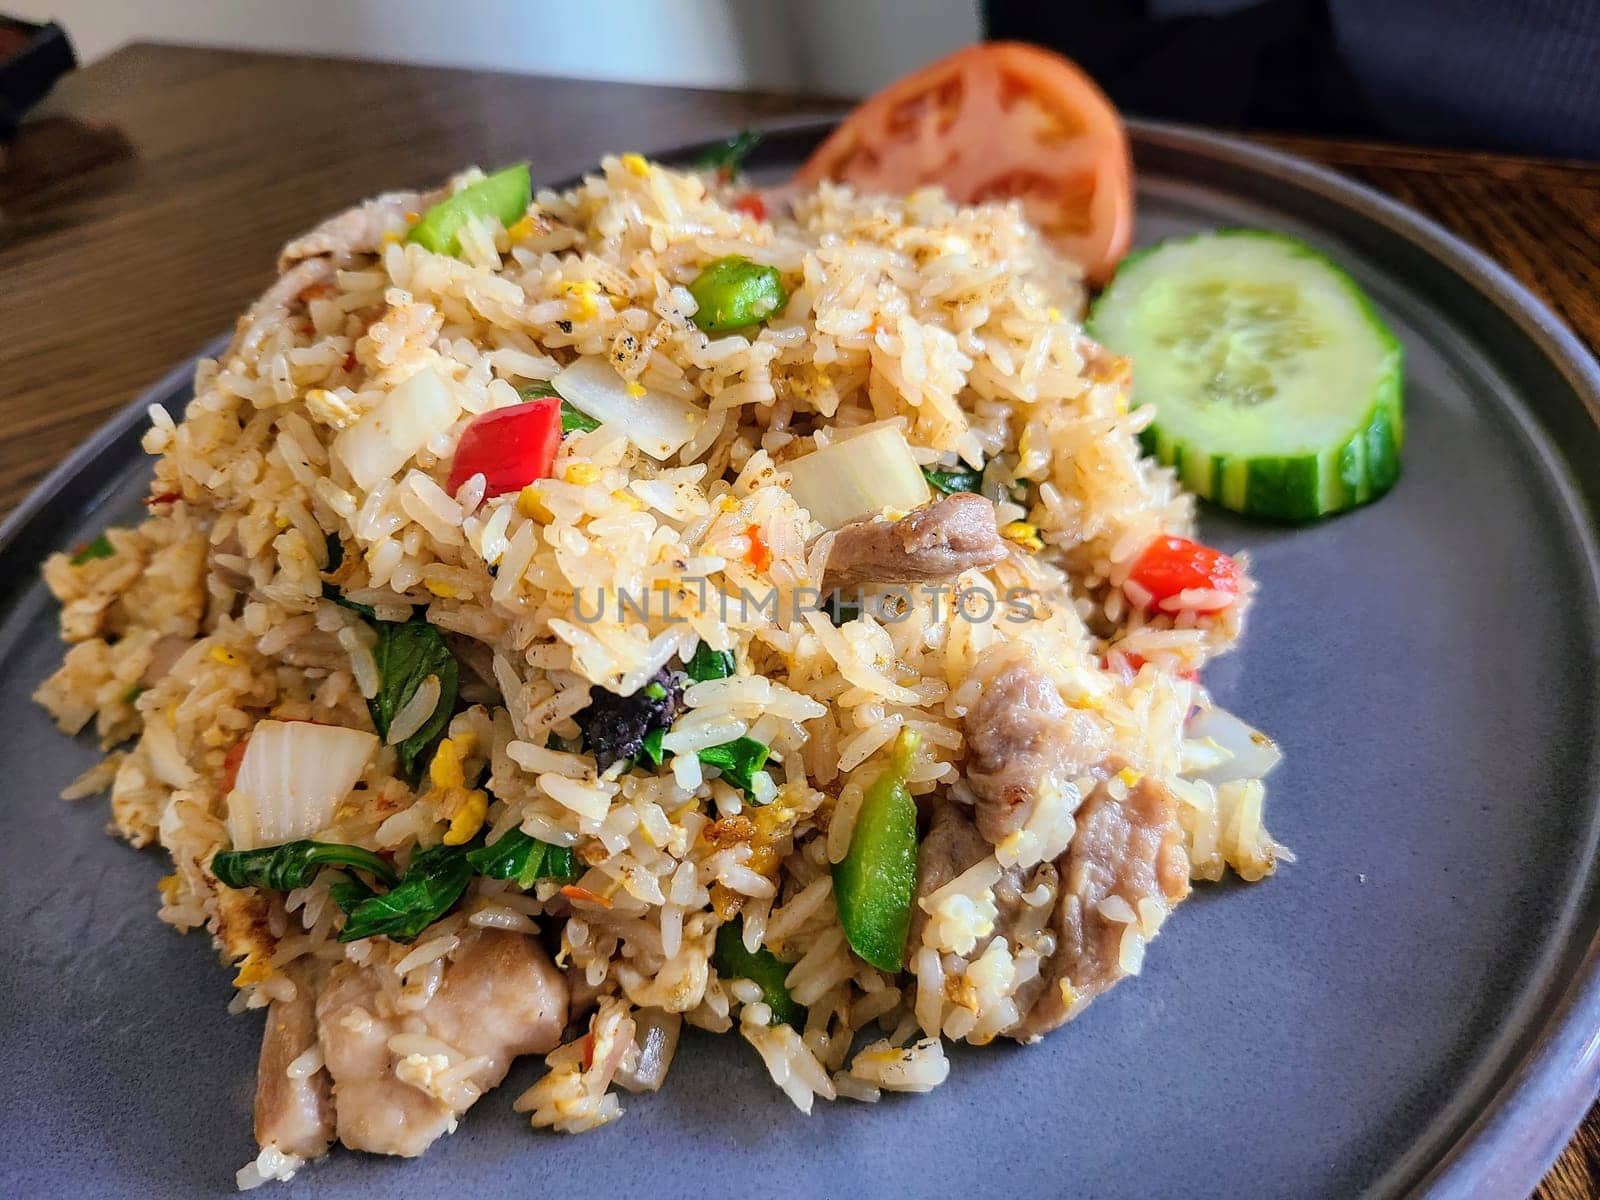 Savory Thai-inspired fried rice served in a modern setting, Fort Wayne, Indiana.